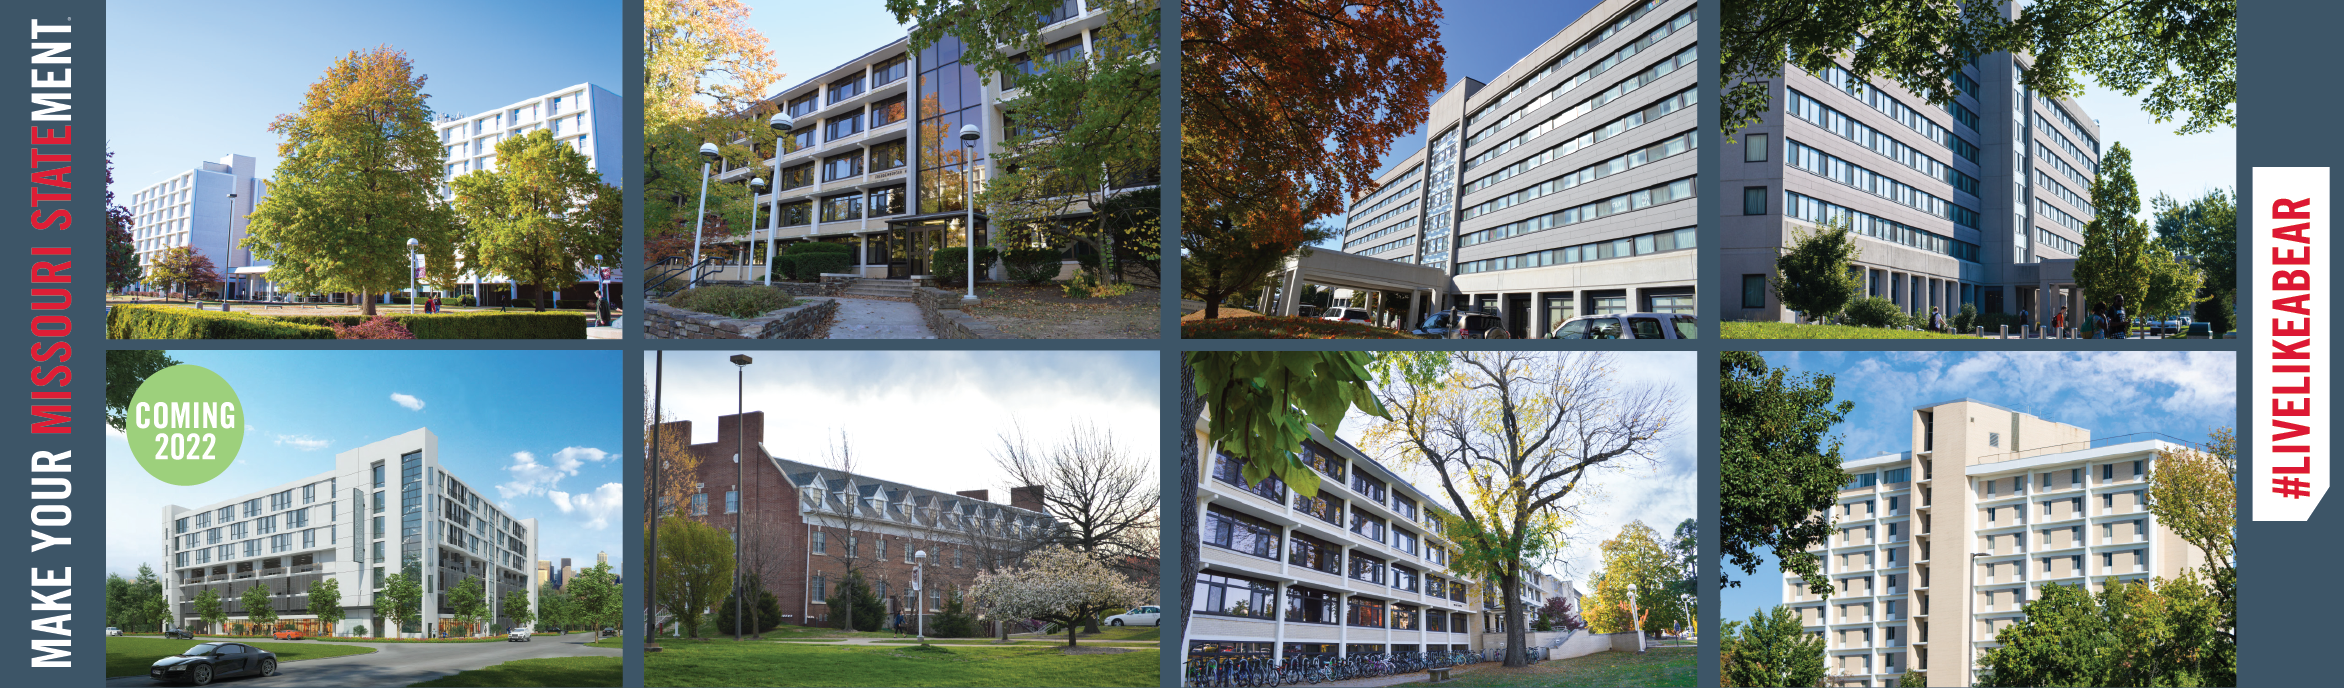 Collage of exterior images of residence halls at Missouri State University